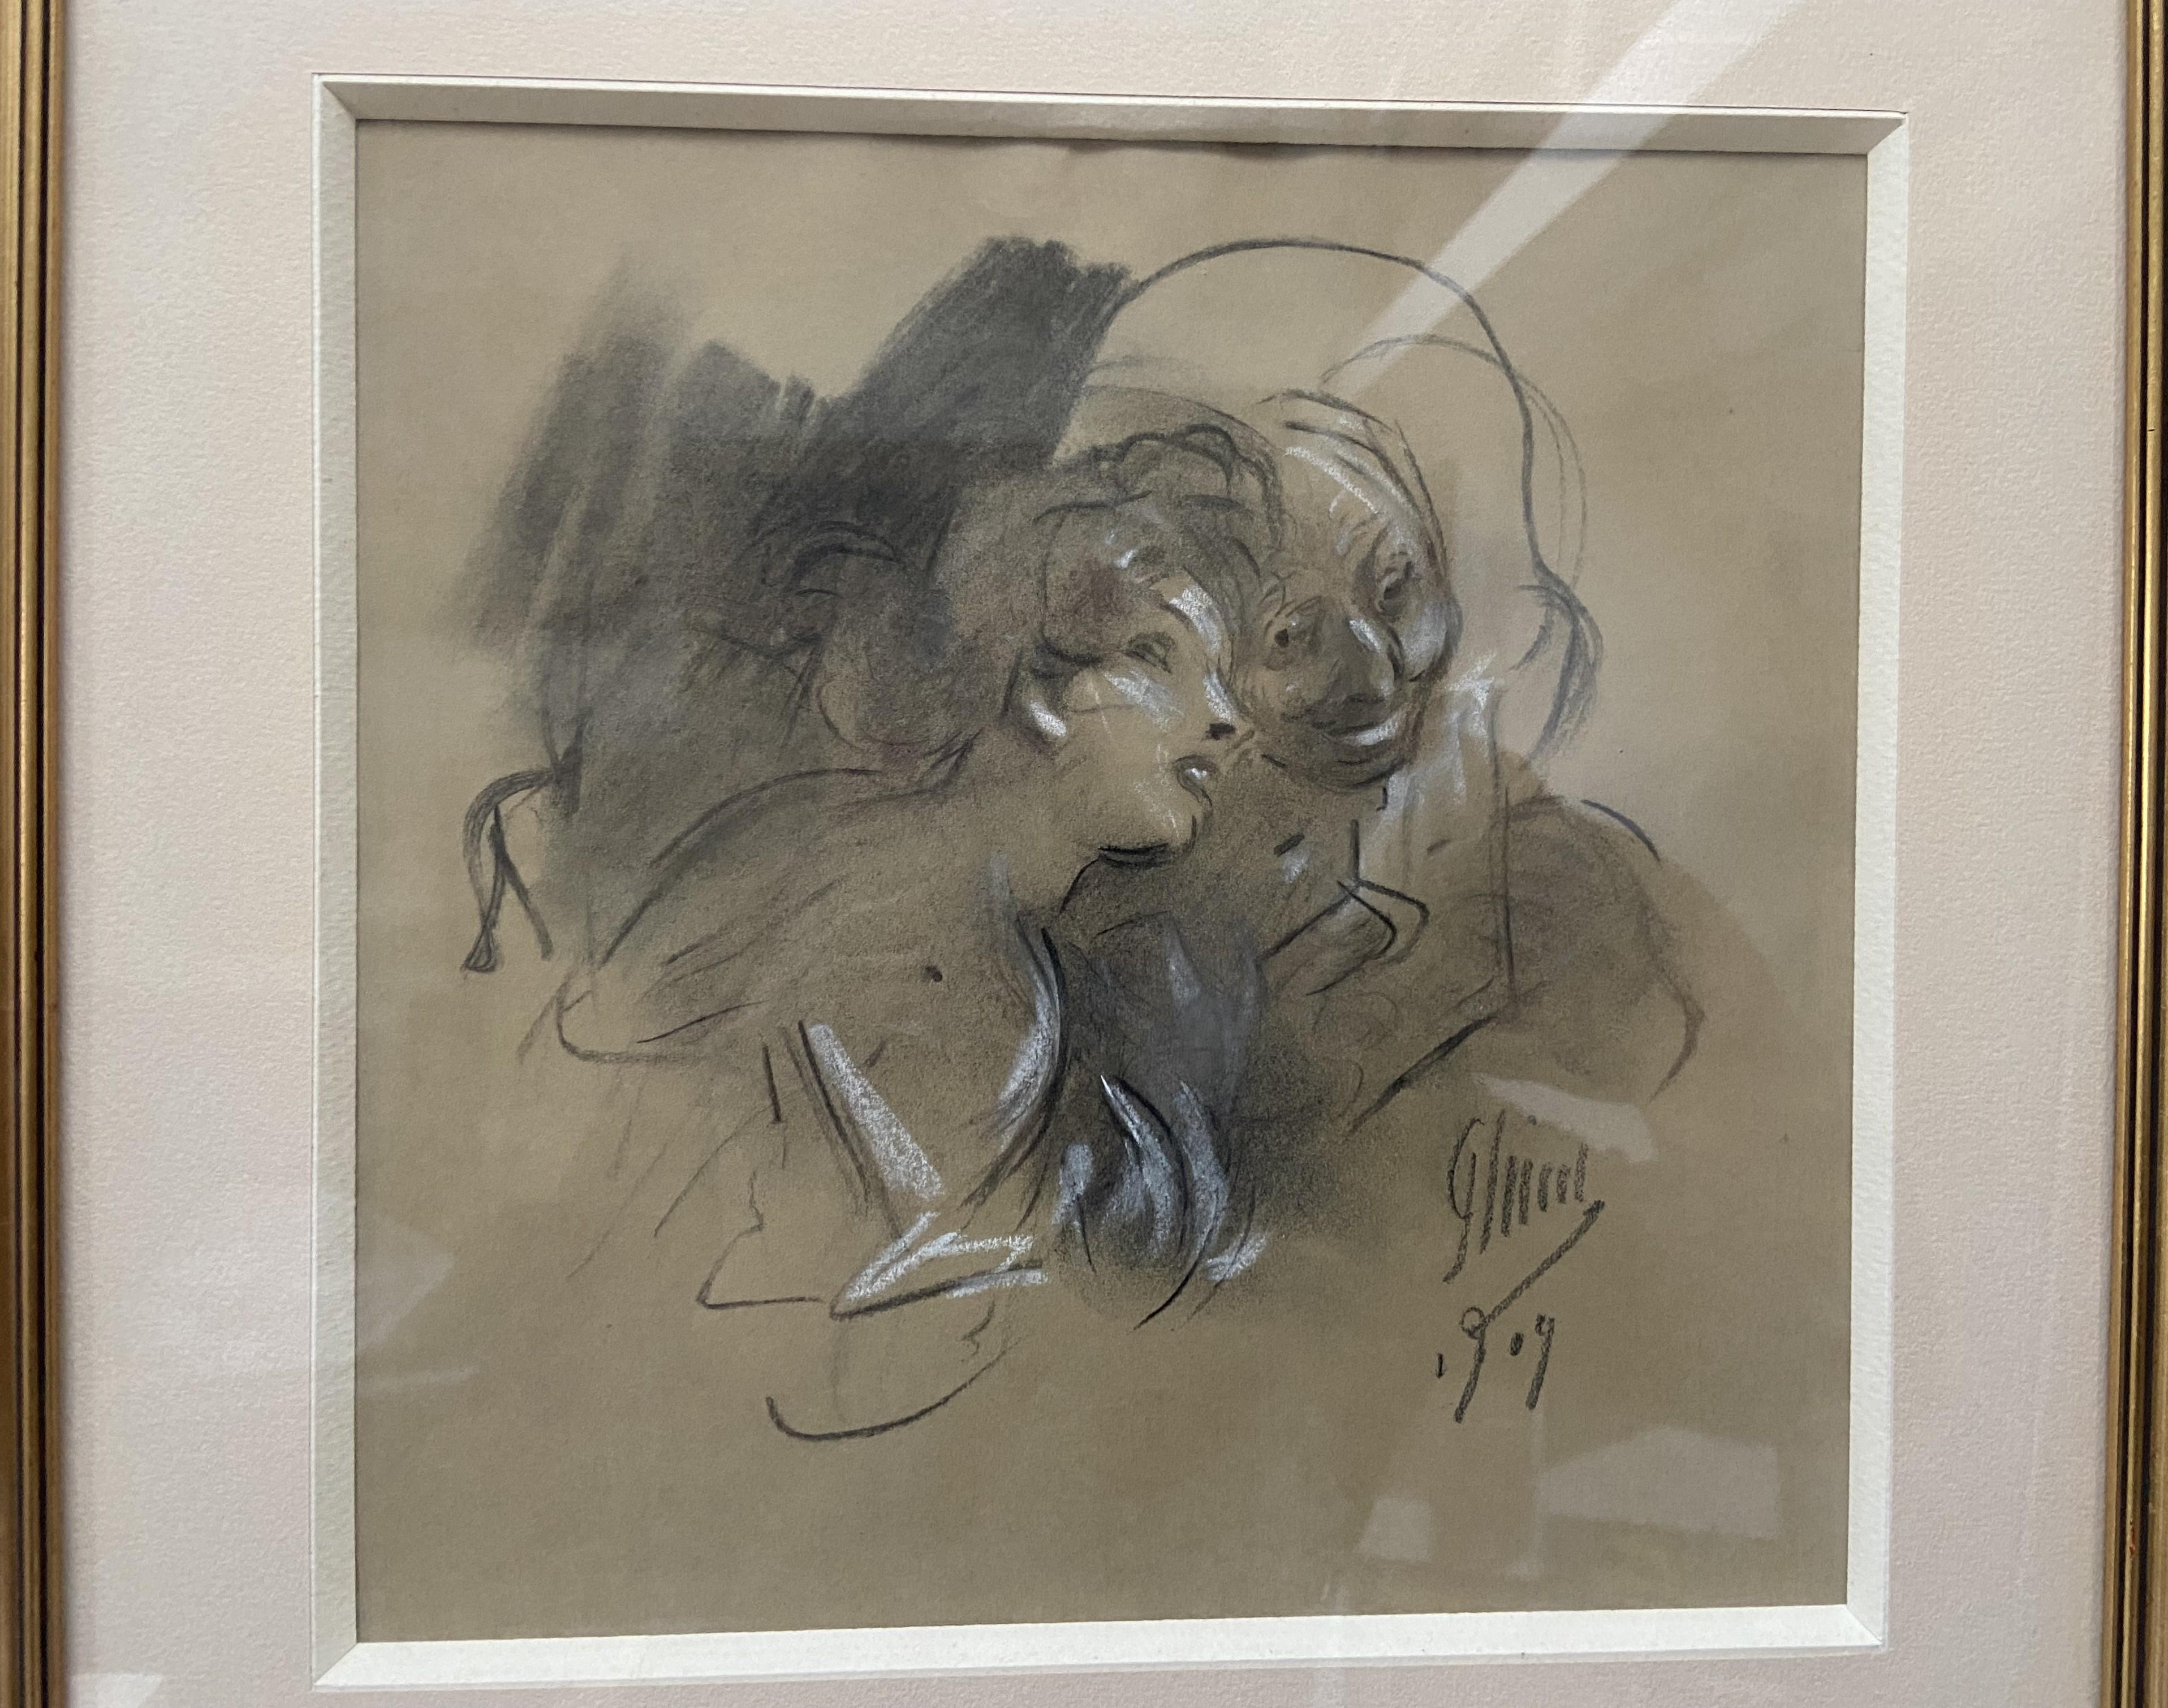 Jules Cheret (1836-1932) 
La Confidence (The confidence) 1909
signed and dated in the lower right
Charcoal  and heightenings of white chalk
22.7 x 22.7 cm
Framed under glass : 33.8 x 33.8 cm

Another work that is highly representative of Jules